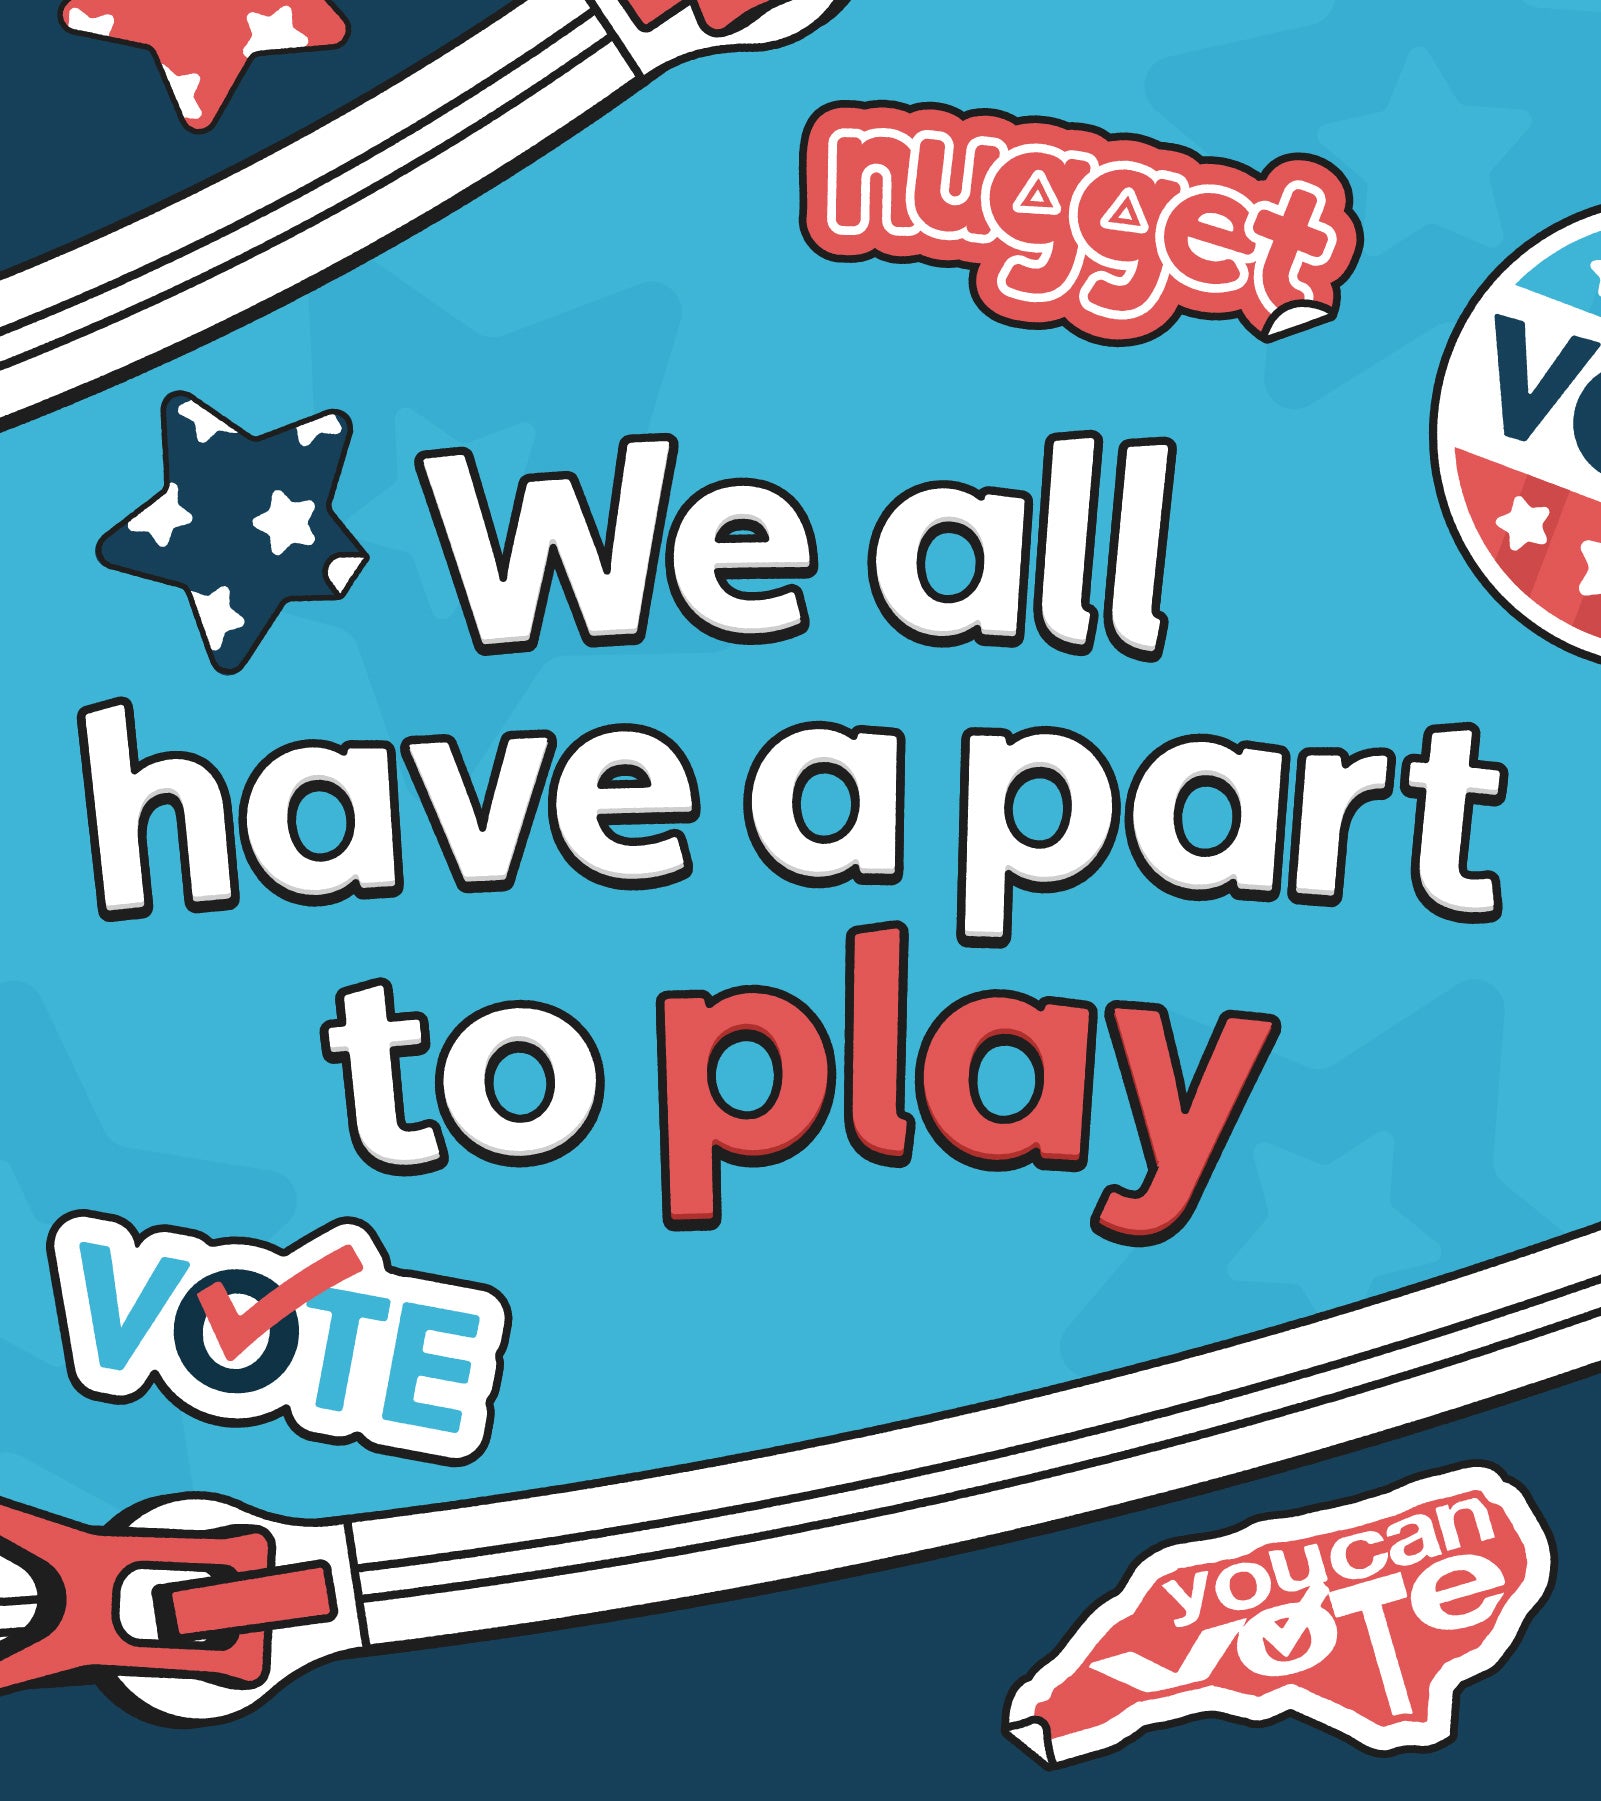 We all have a part to play! Nugget logo, You Can vote logo